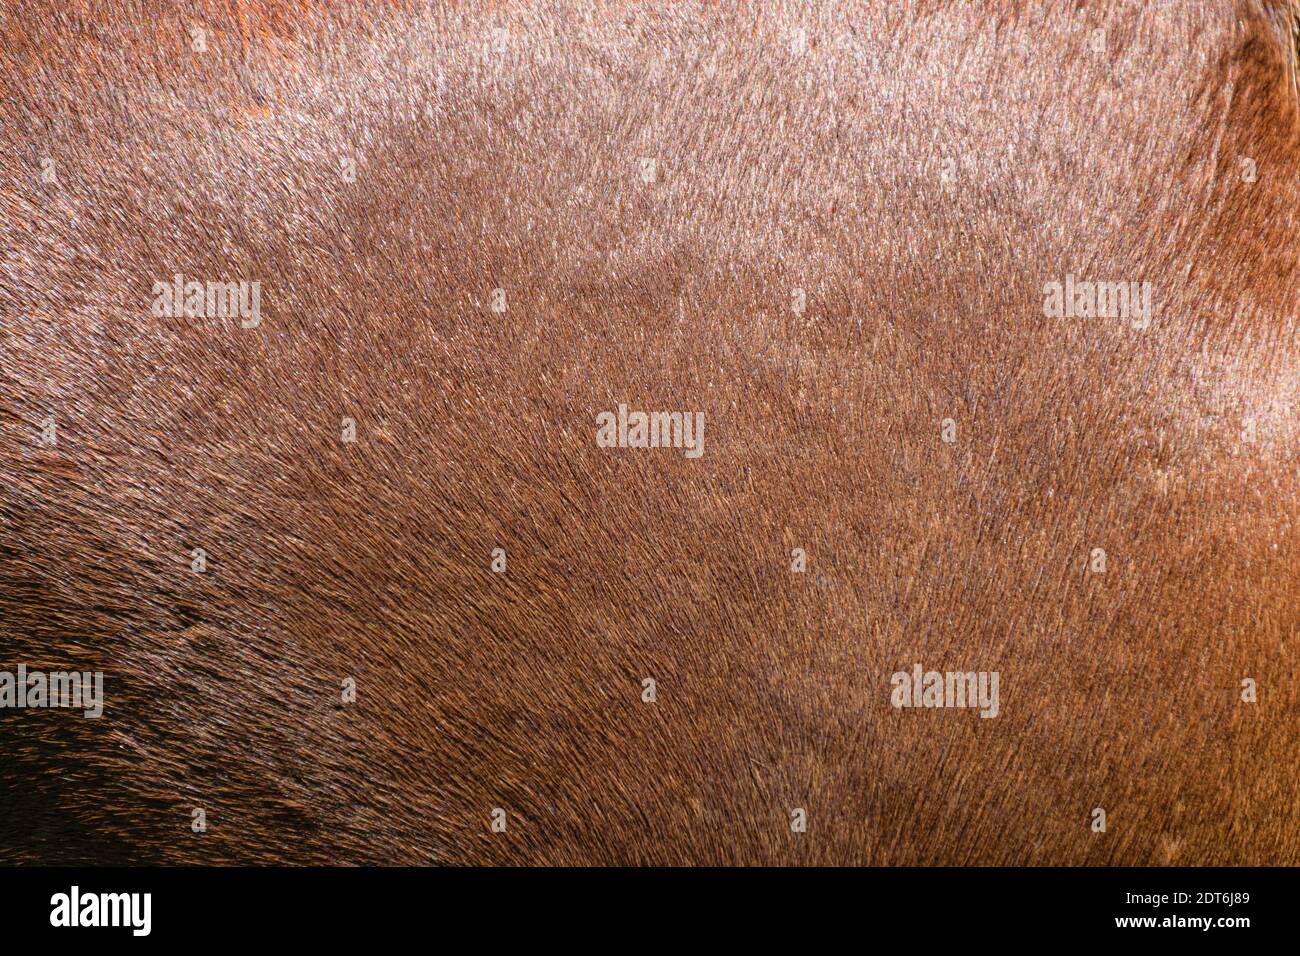 Horse pelage texture in brown color. Stock Photo